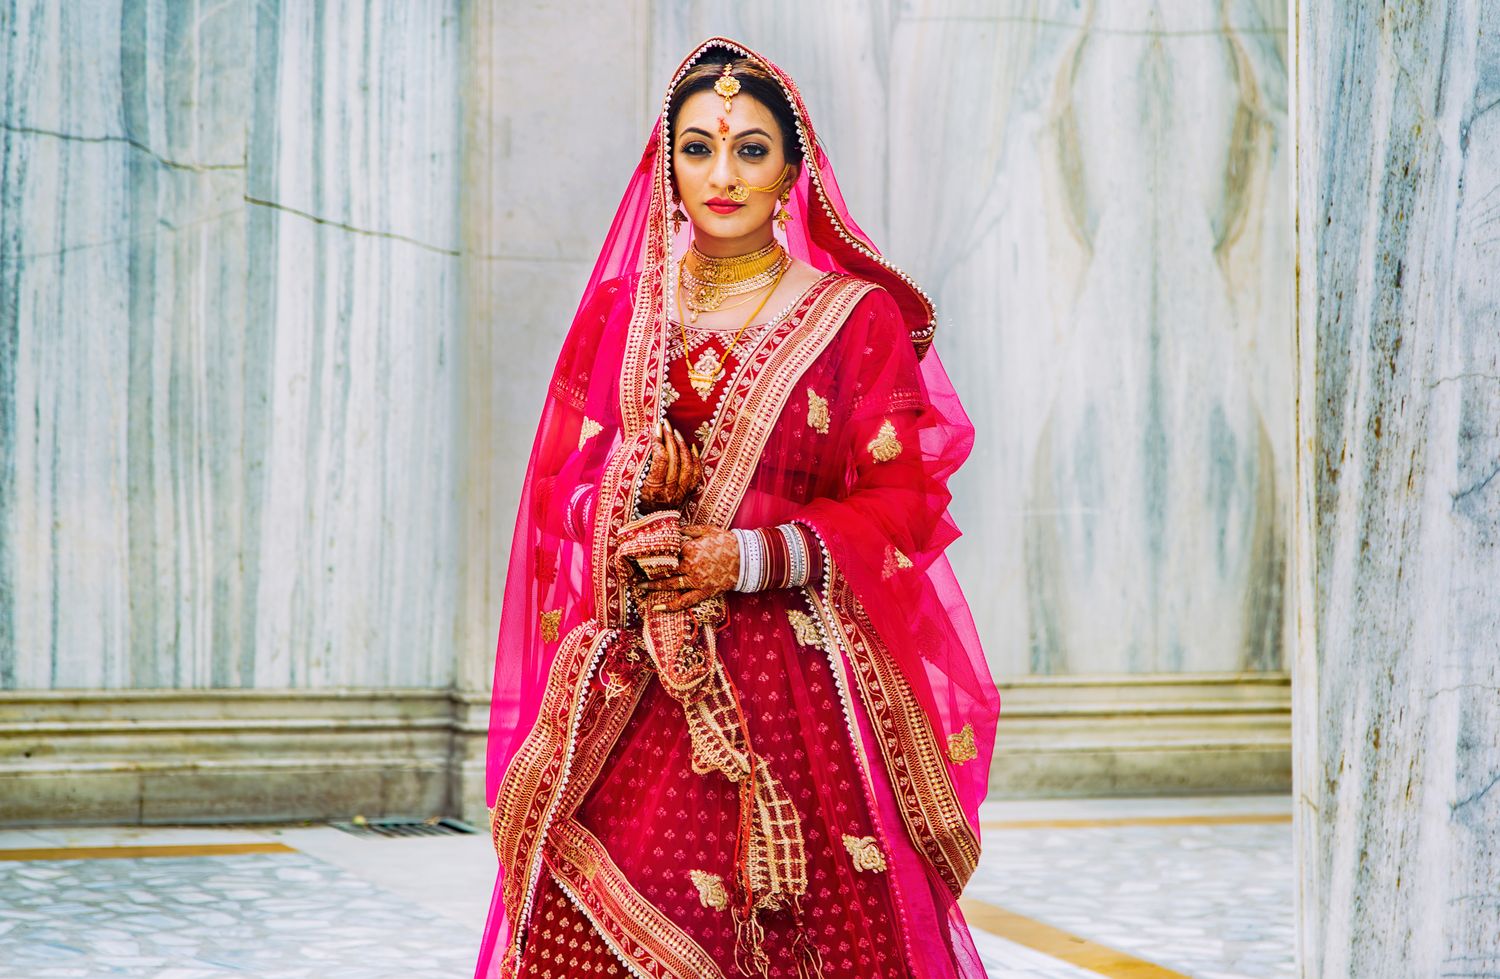 The Colors and Fabrics of North Indian Wedding Attire